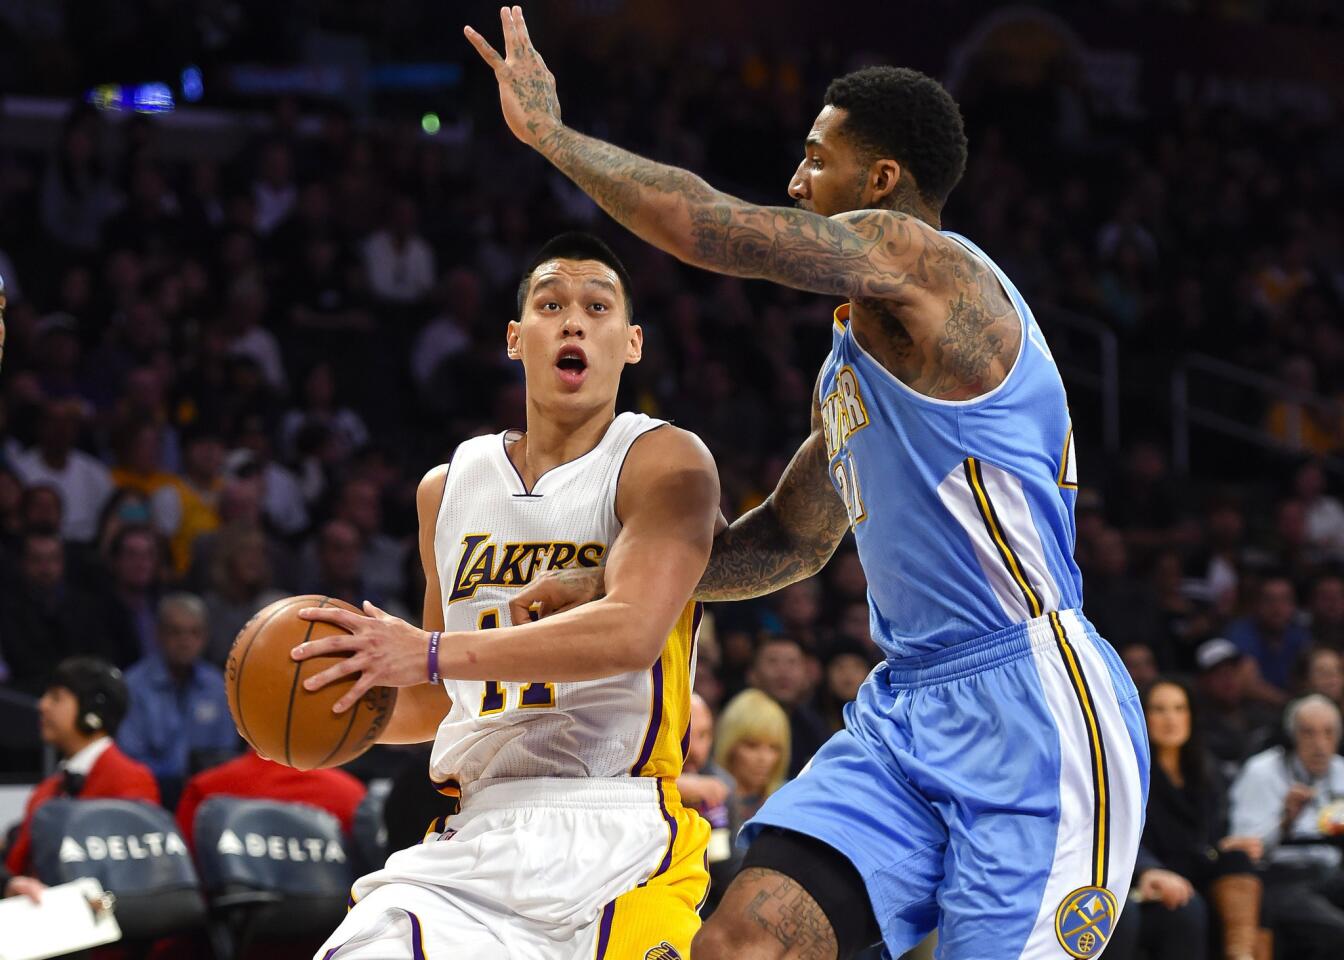 Nuggets forward Wilson Chandler tries to cut off a drive by Lakers point guard Jeremy Lin in the first half.